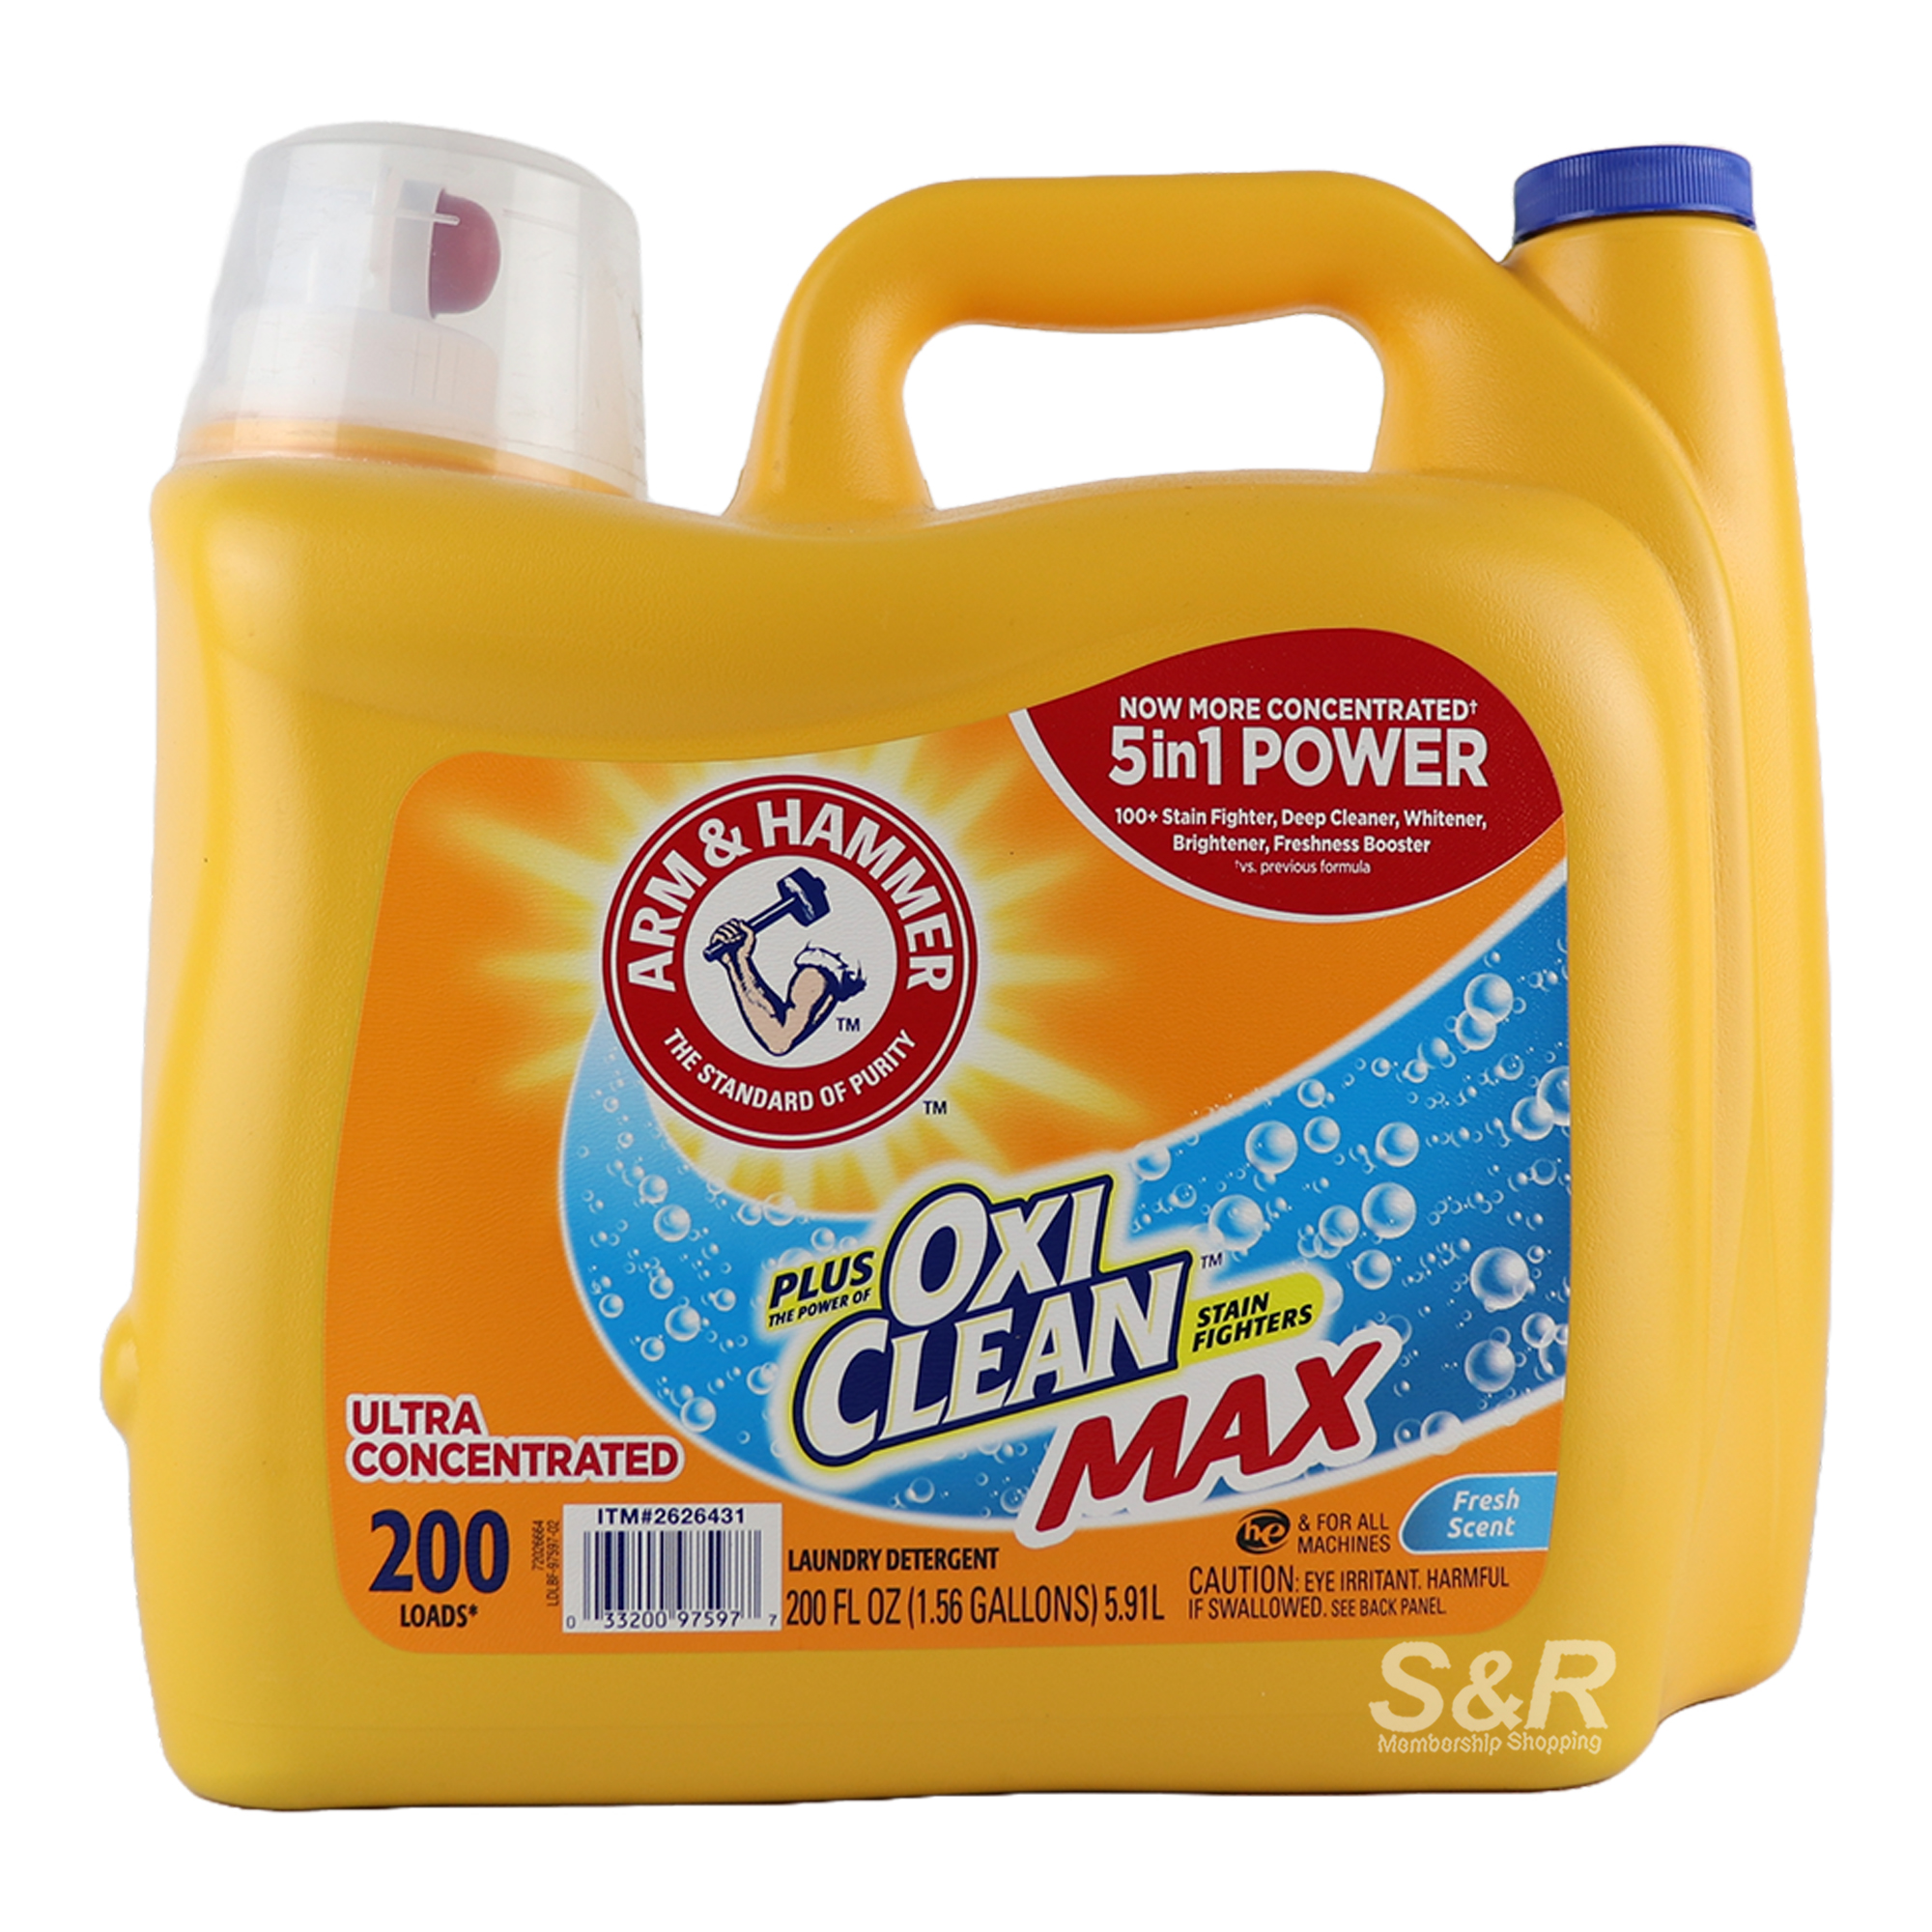 Arm & Hammer Oxi Clean Max Stain Fighters Laundry Detergent Fresh Scent 5.91L